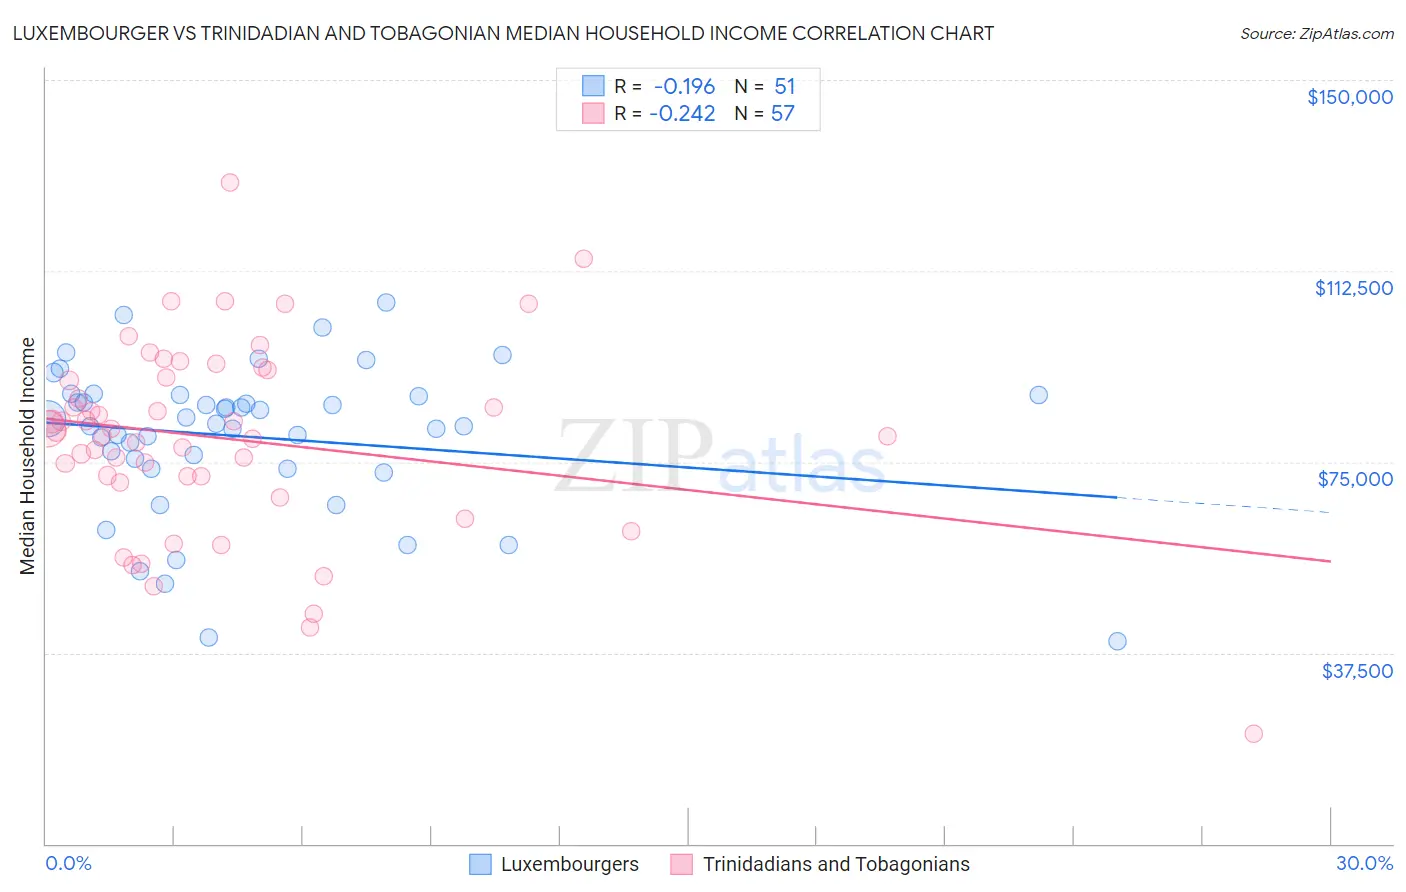 Luxembourger vs Trinidadian and Tobagonian Median Household Income